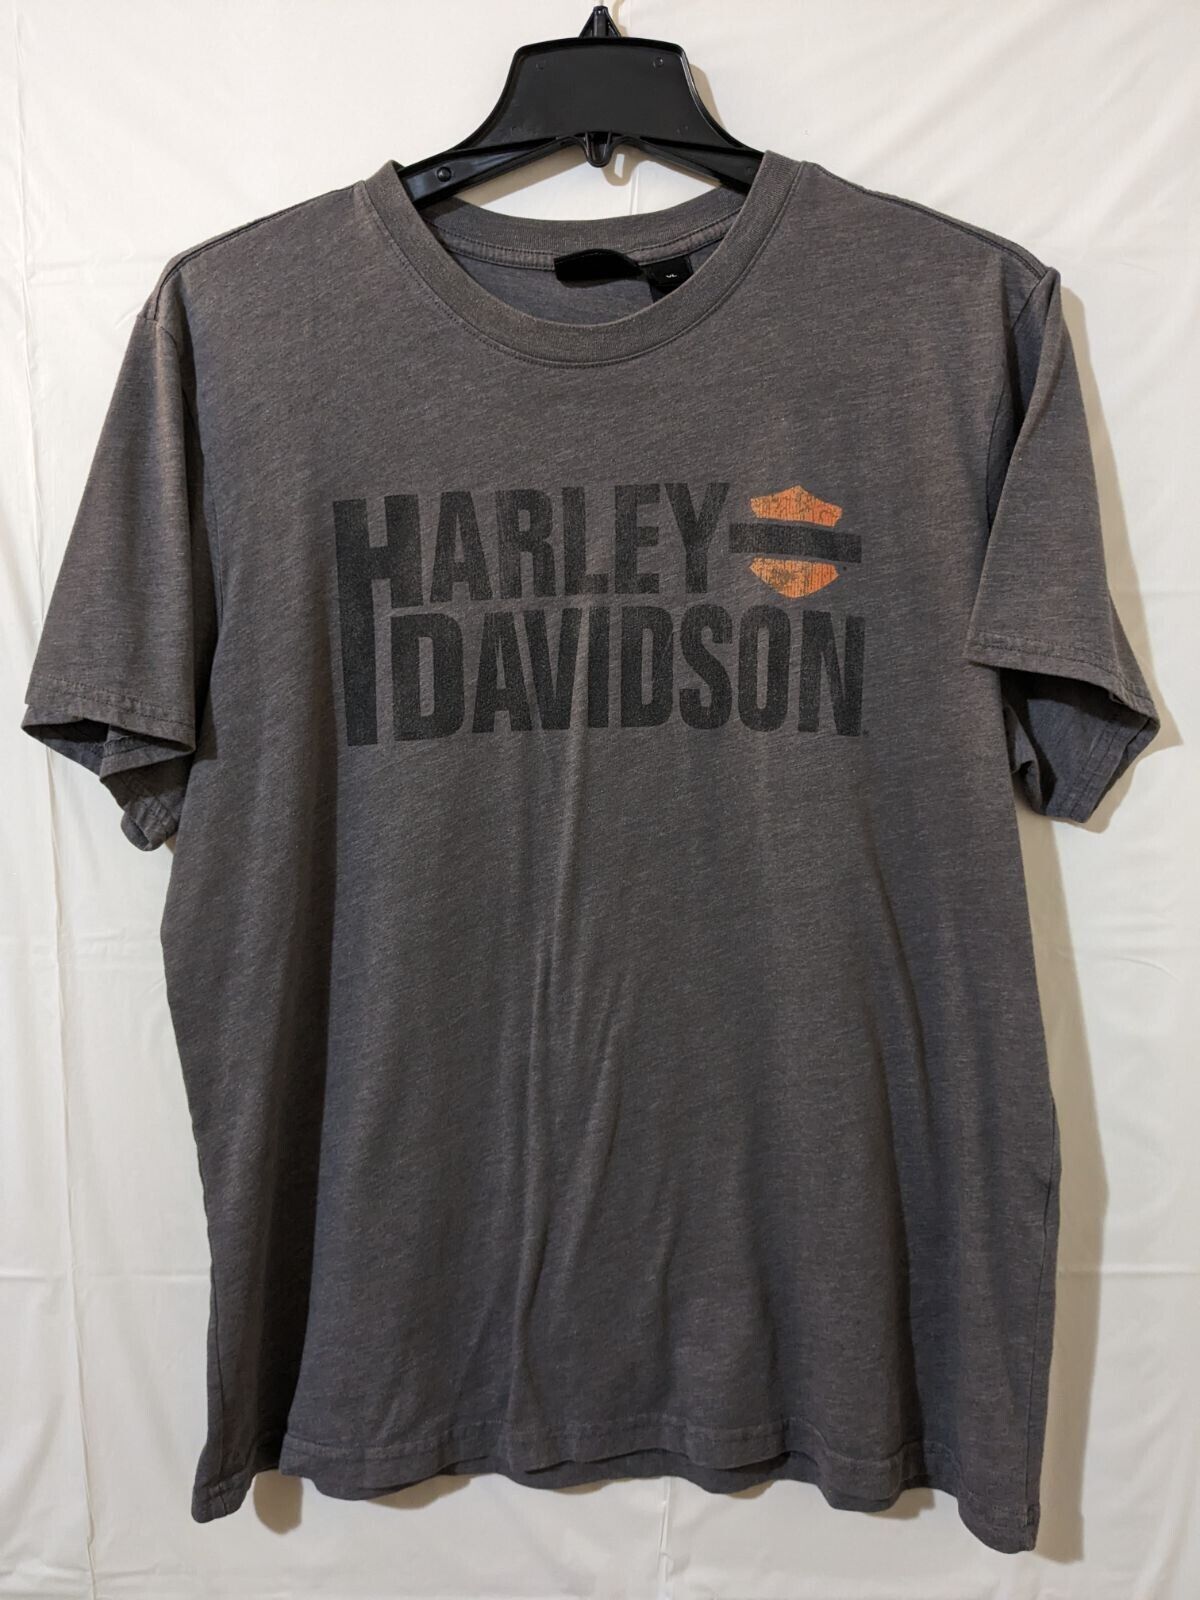 Harley Davidson Sz XL Men's T-Shirt Made In USA Pre-Owned